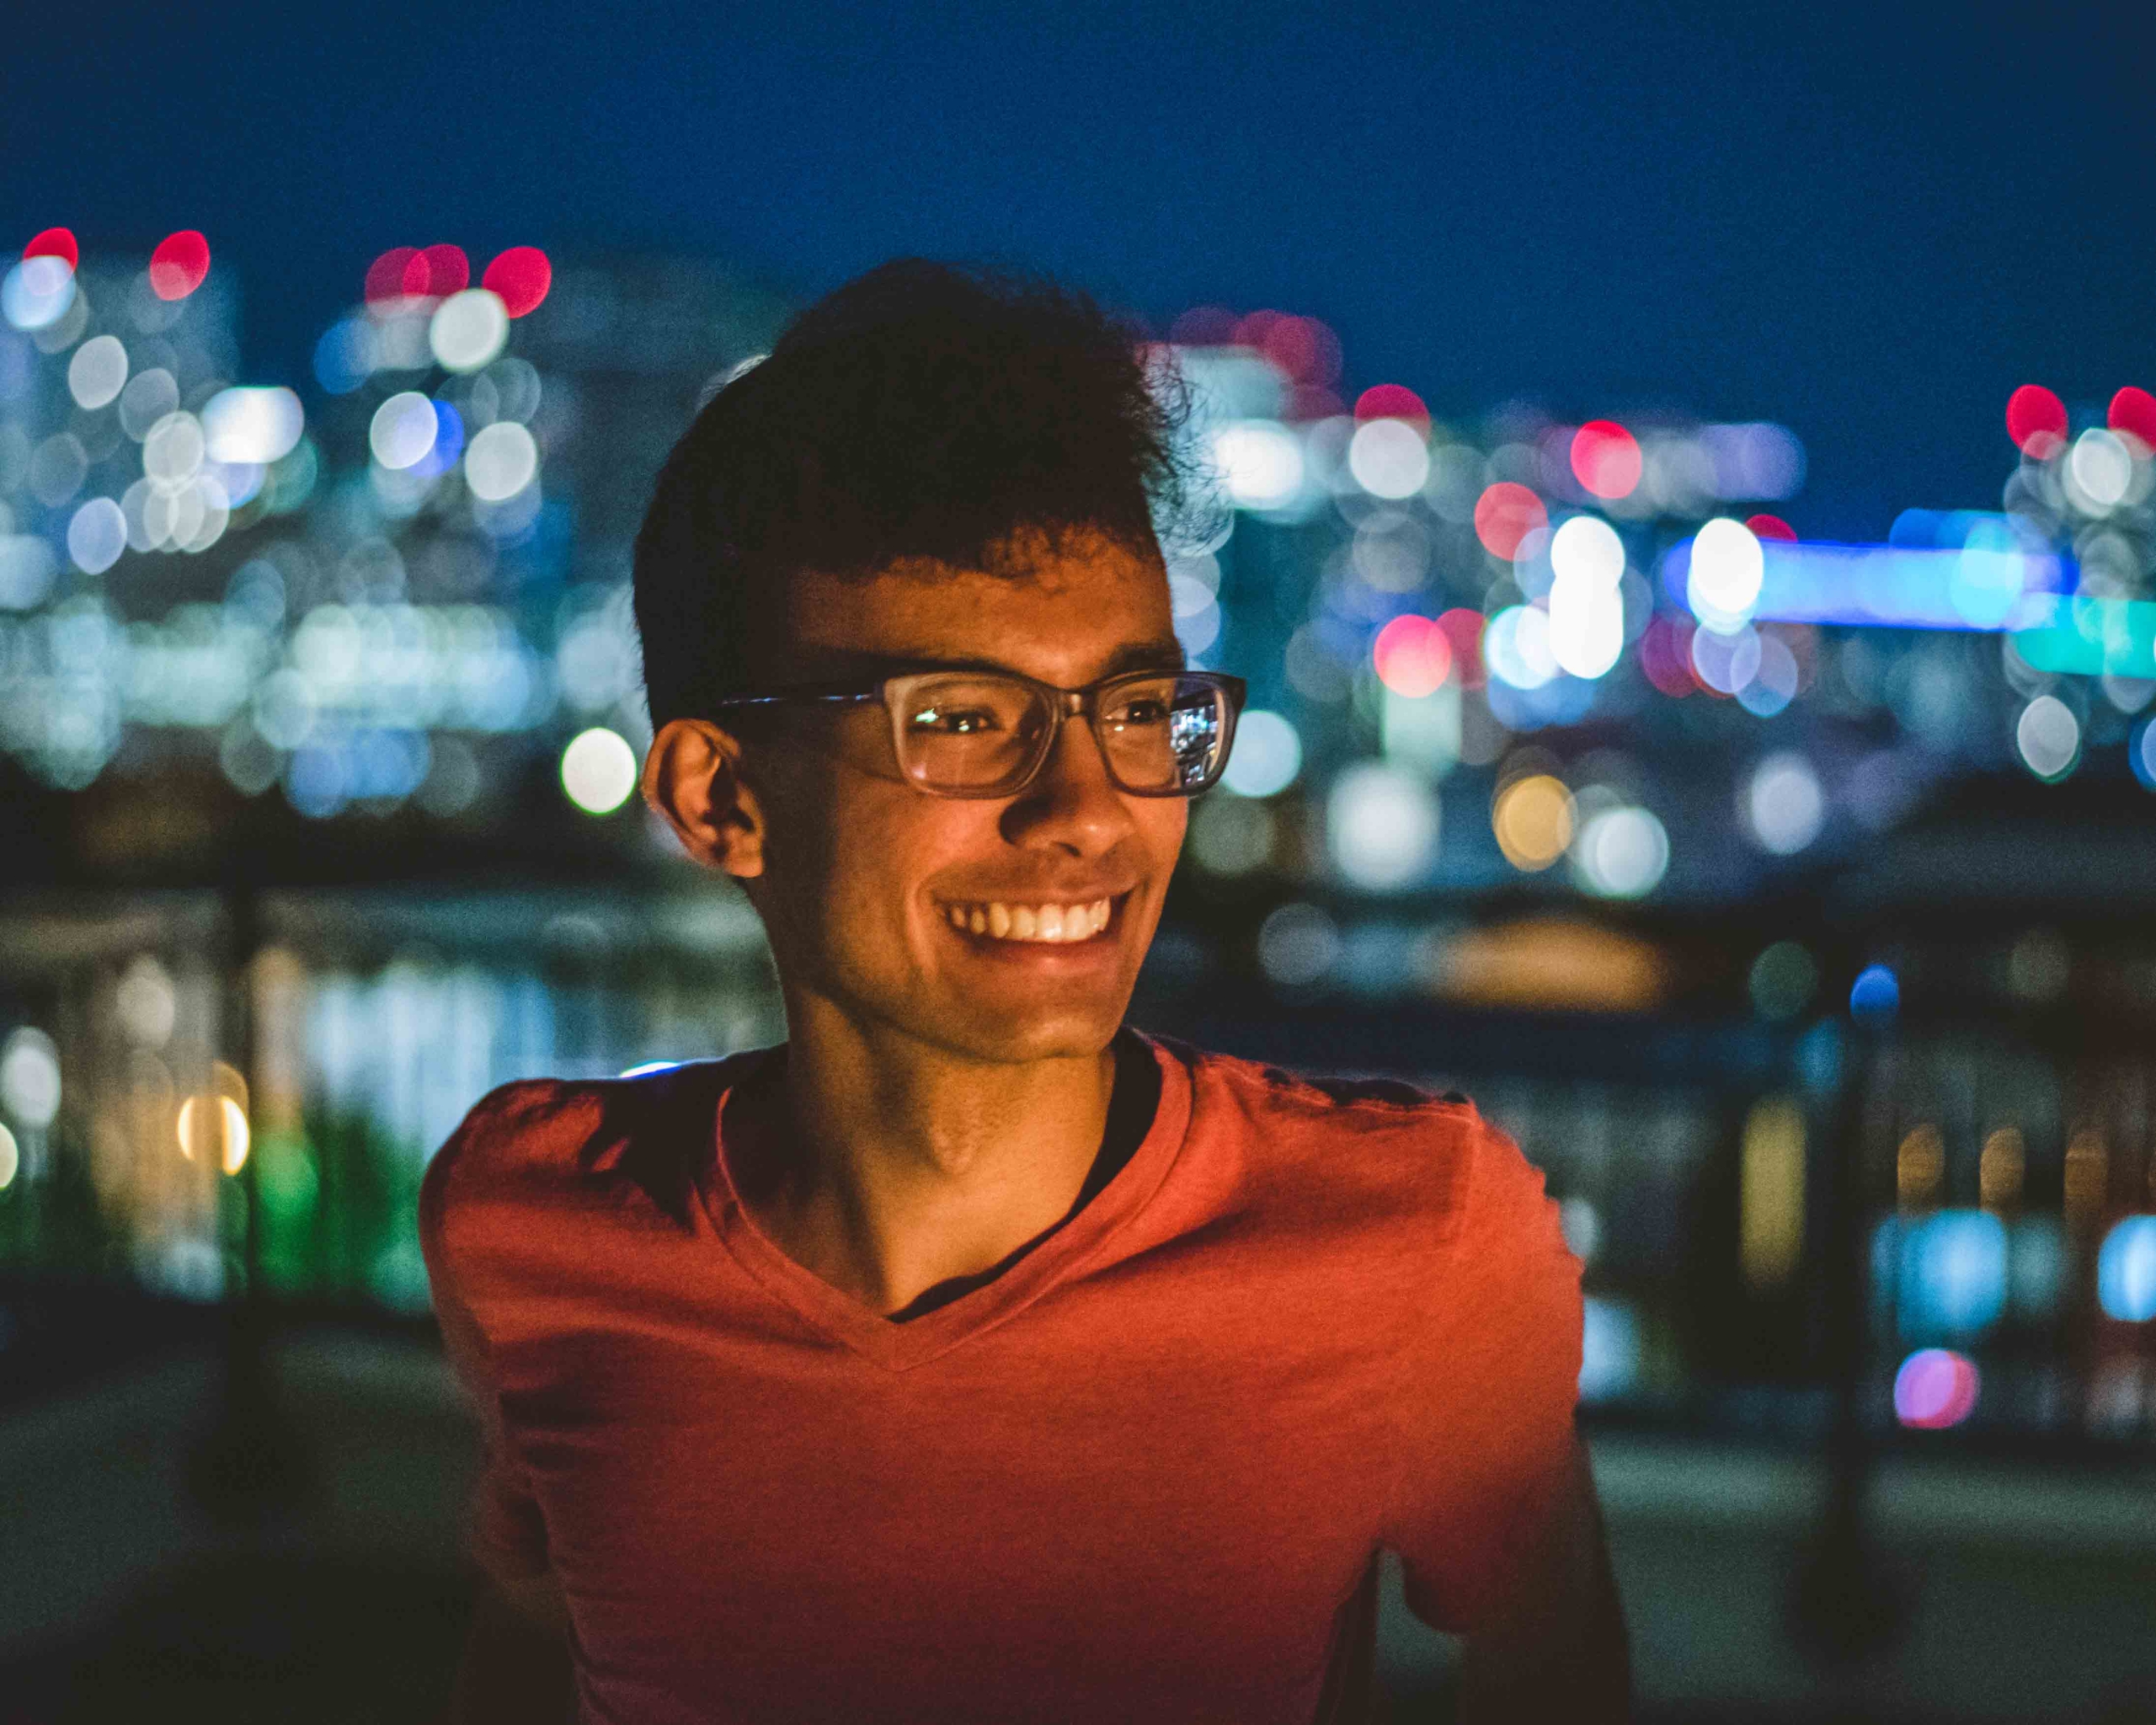 Arpan, a Hack4Impact co-director, smiling in front of city lights.